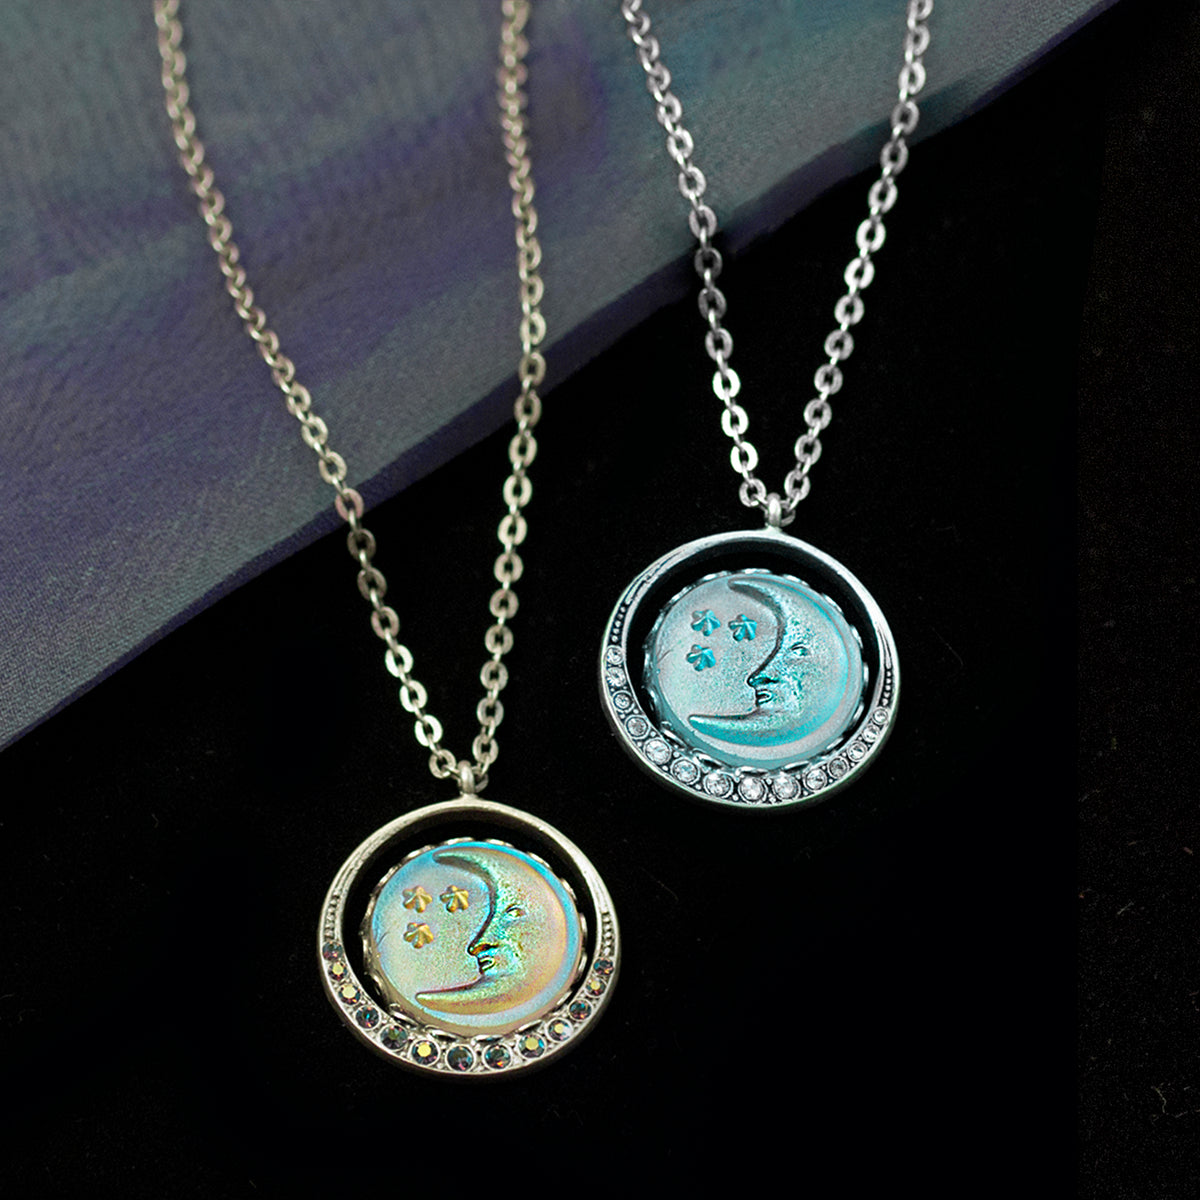 Iridescent Moon Necklace N1631 - sweetromanceonlinejewelry